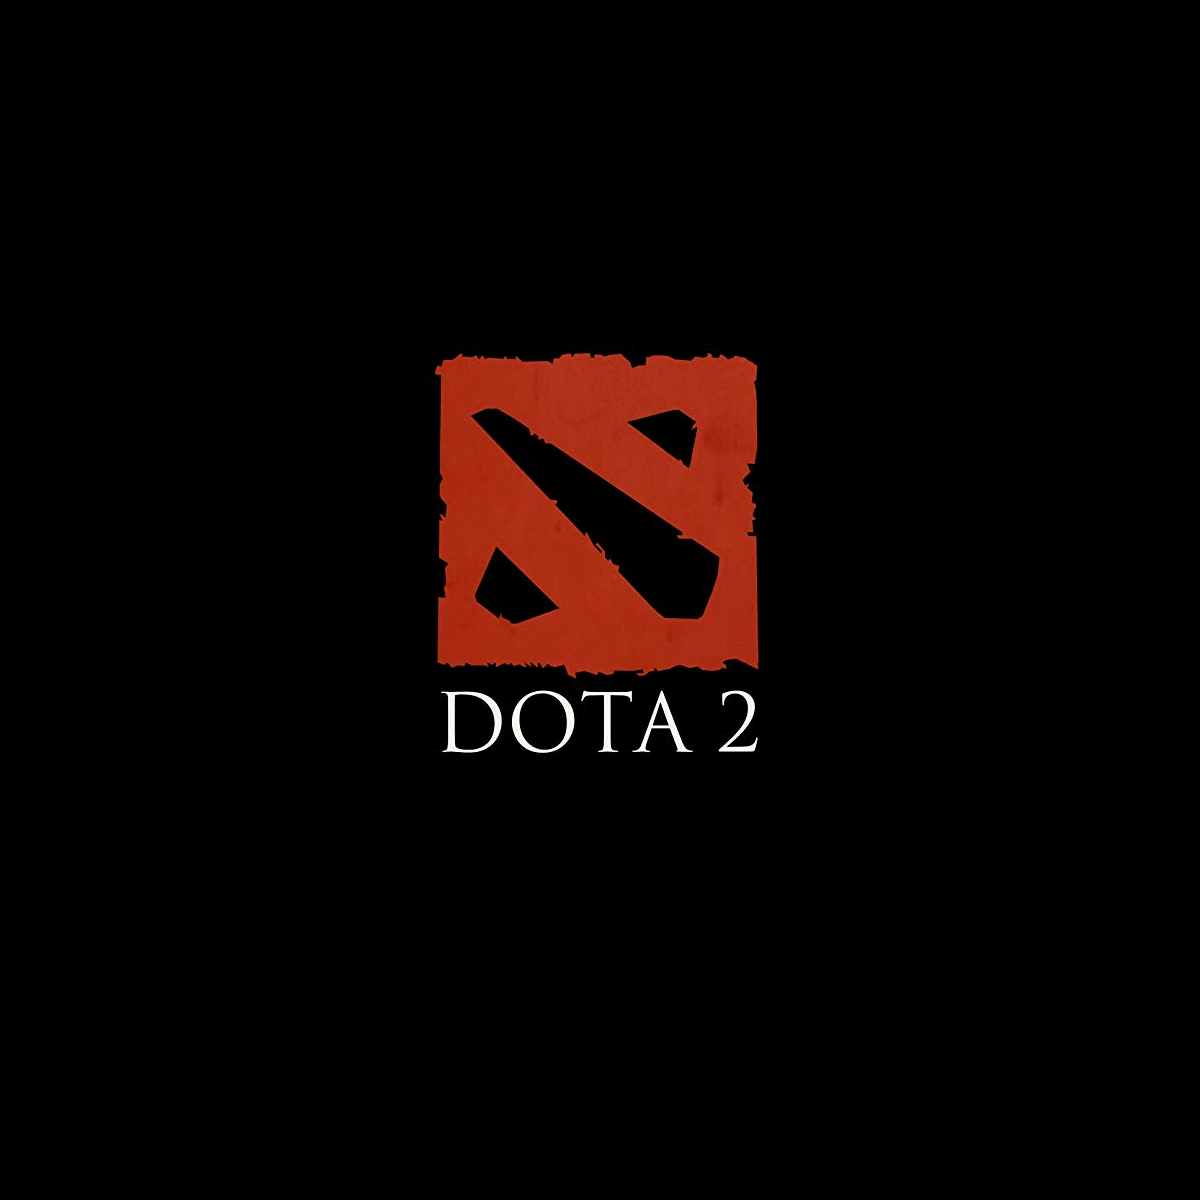 How To Fix Searching For The Dota 2 Game Coordinator Error